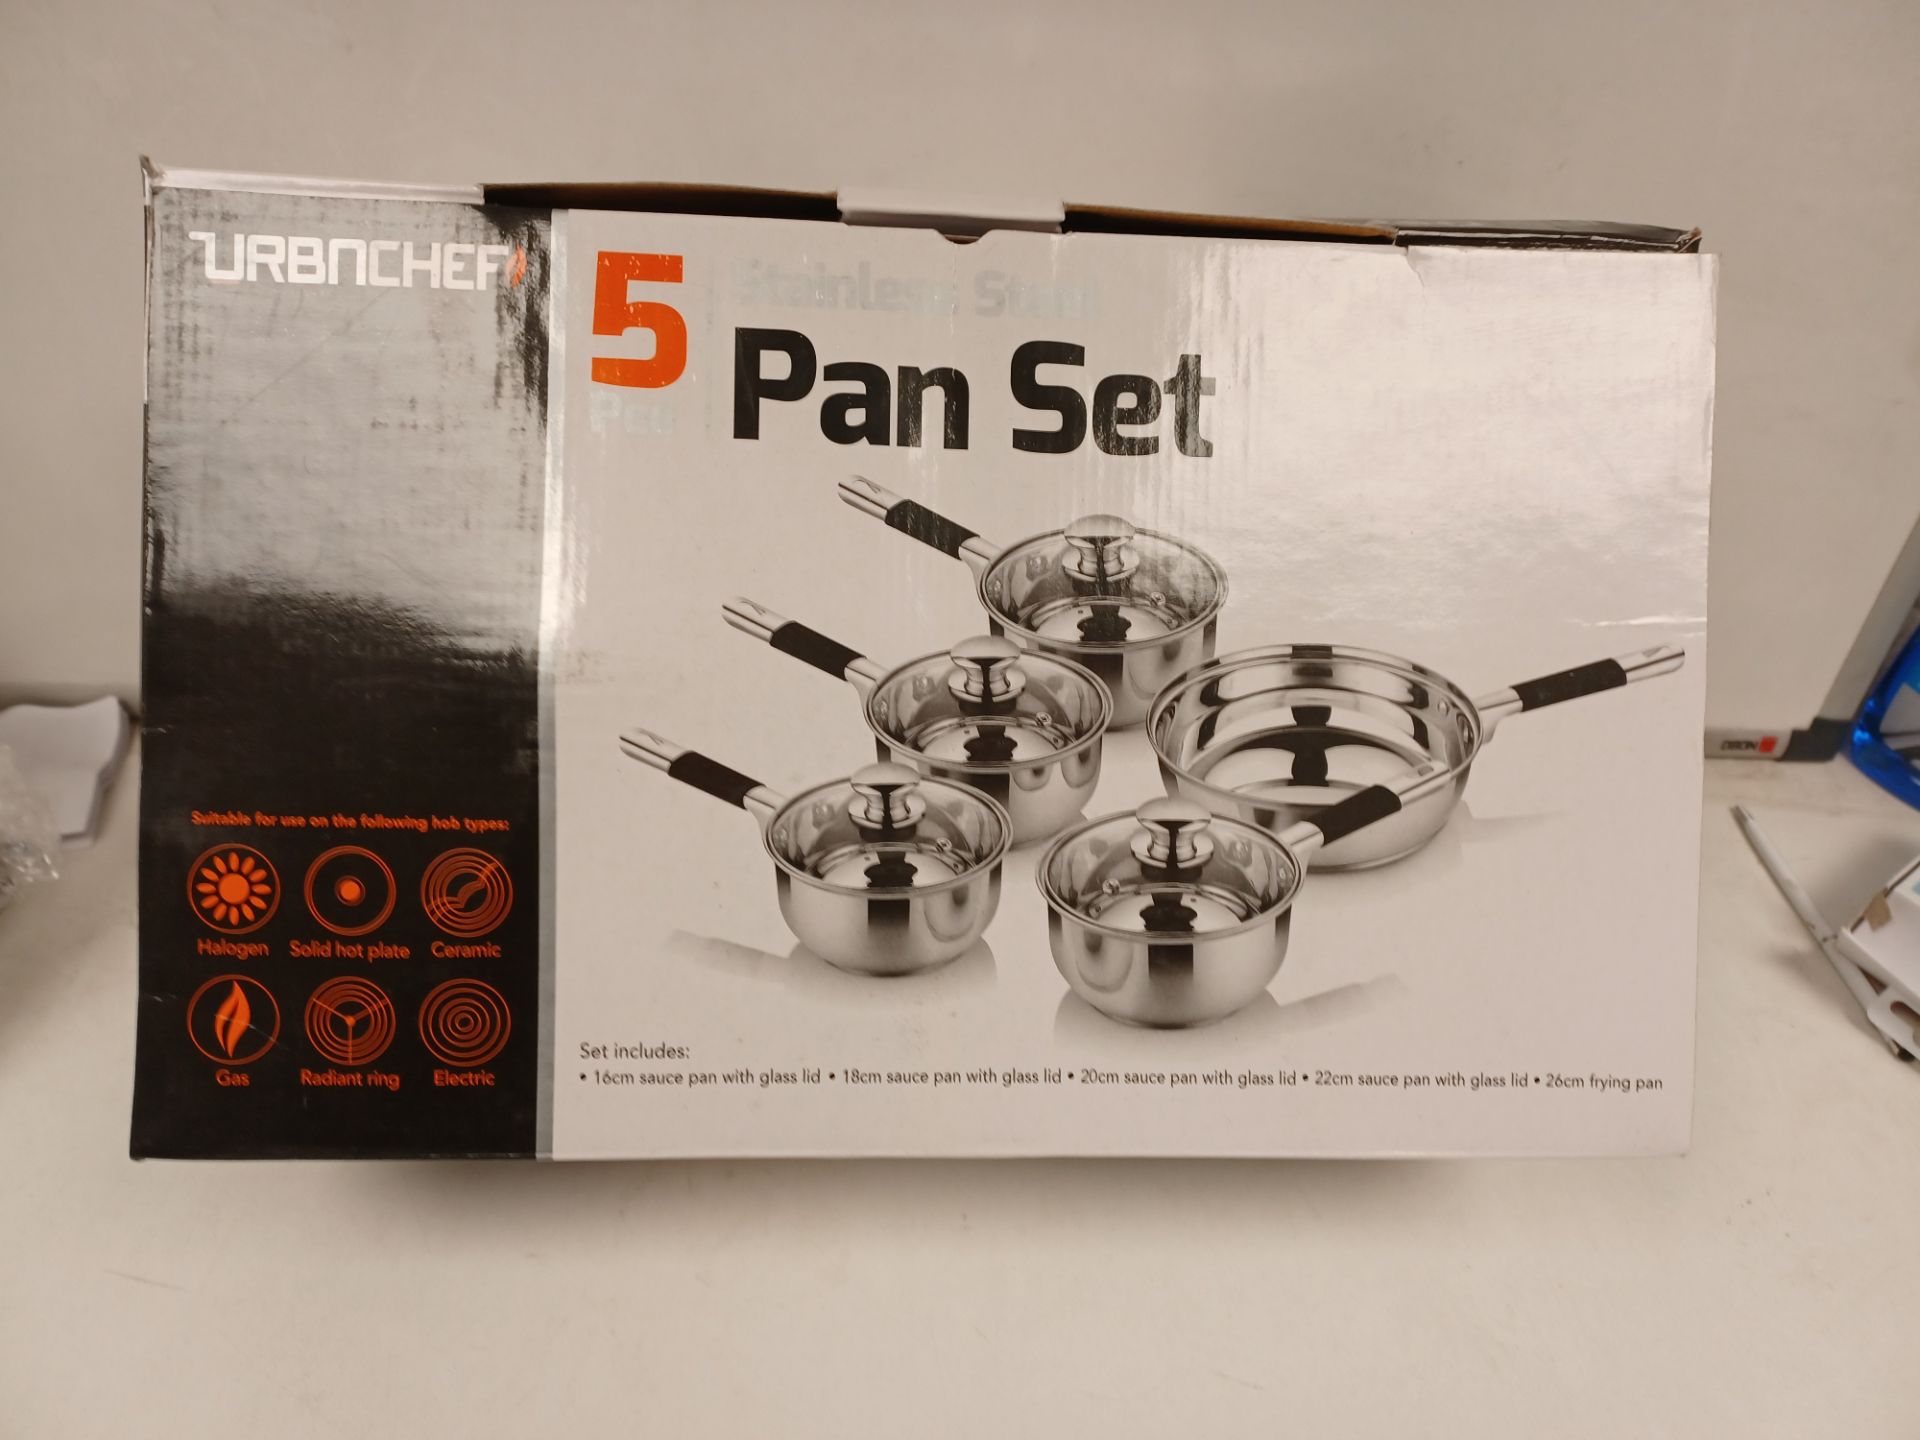 PALLET TO CONTAIN 36 X BOXED SETS OF URBNCHEF 5 PIECE STAINLESS STEEL PAN SETS. EACH SET INCLUDES: